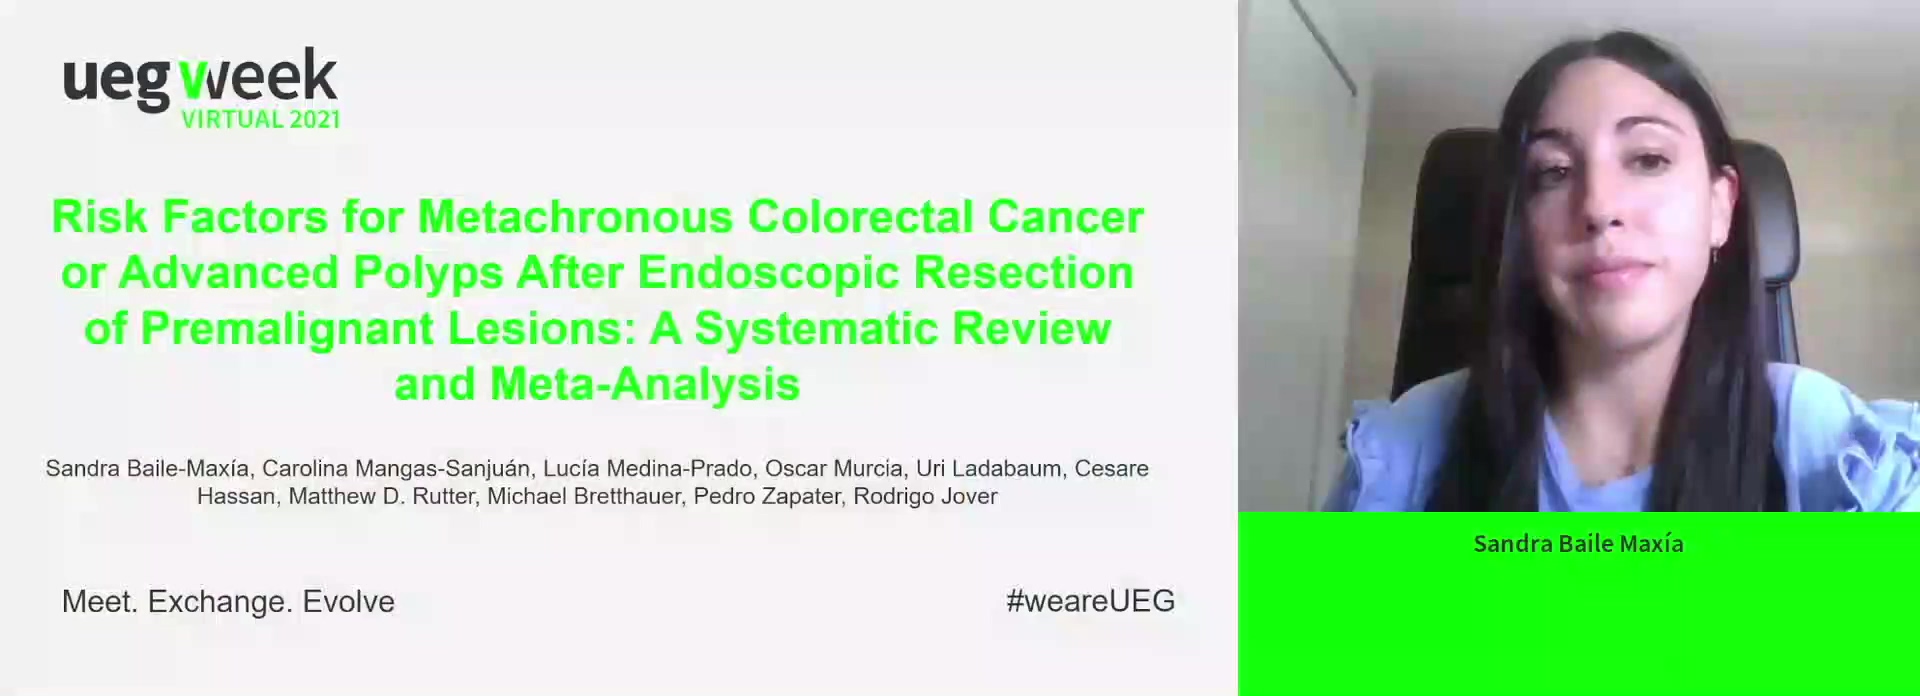 RISK FACTORS FOR METACHRONOUS COLORECTAL CANCER OR ADVANCED POLYPS AFTER ENDOSCOPIC RESECTION OF PREMALIGNANT LESIONS: A SYSTEMATIC REVIEW AND METAANALYSIS